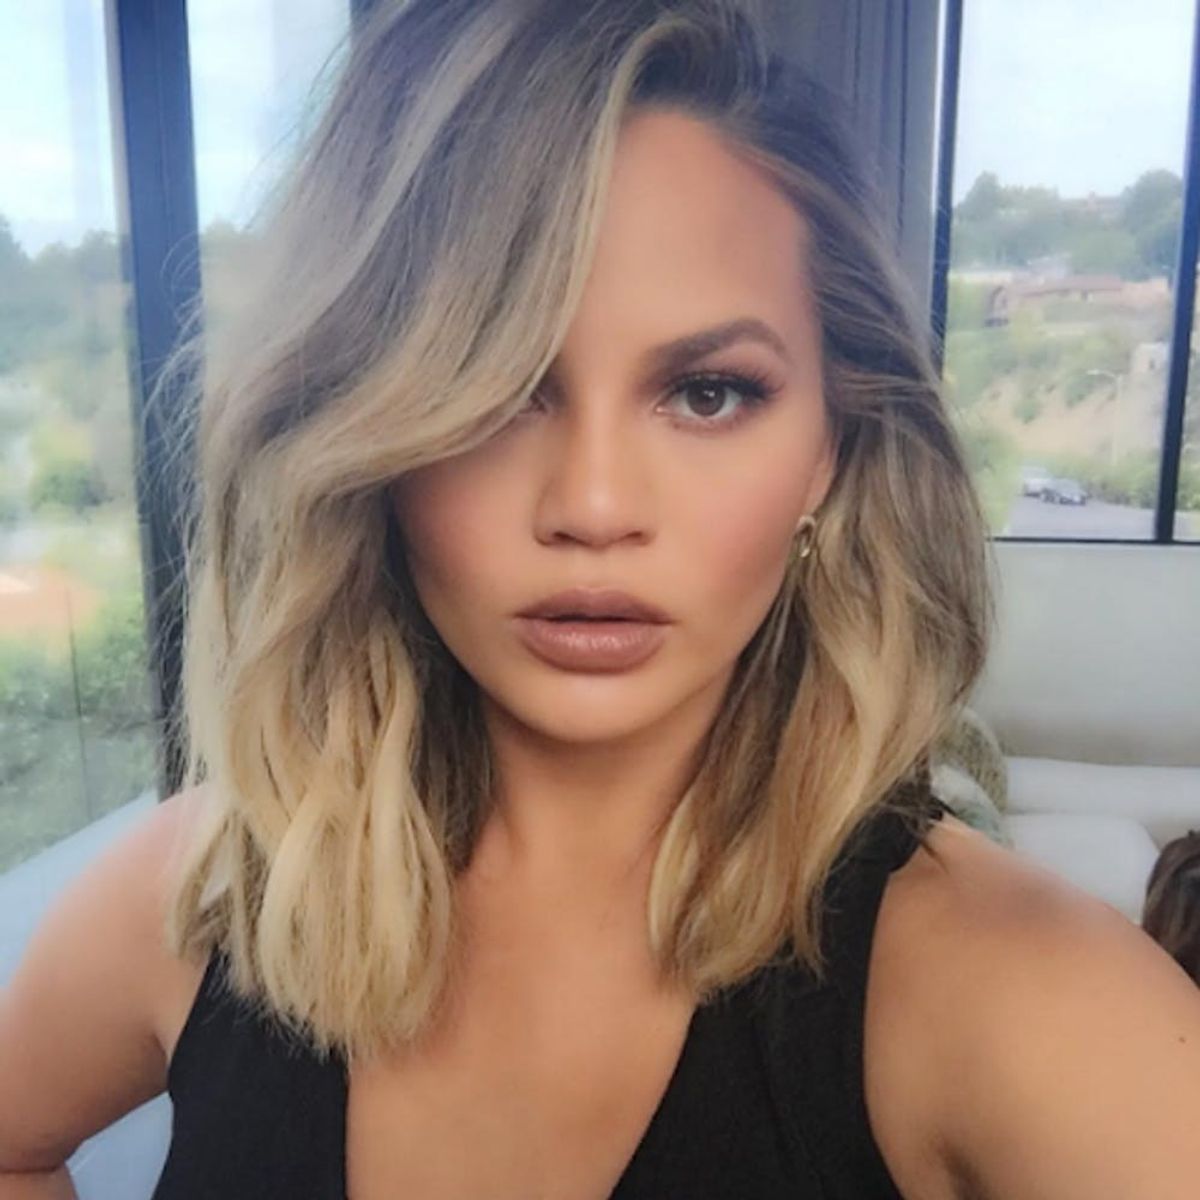 Morning Buzz! This Honest Pic Proves Chrissy Teigen Is the New Mom Role Model We Need + More